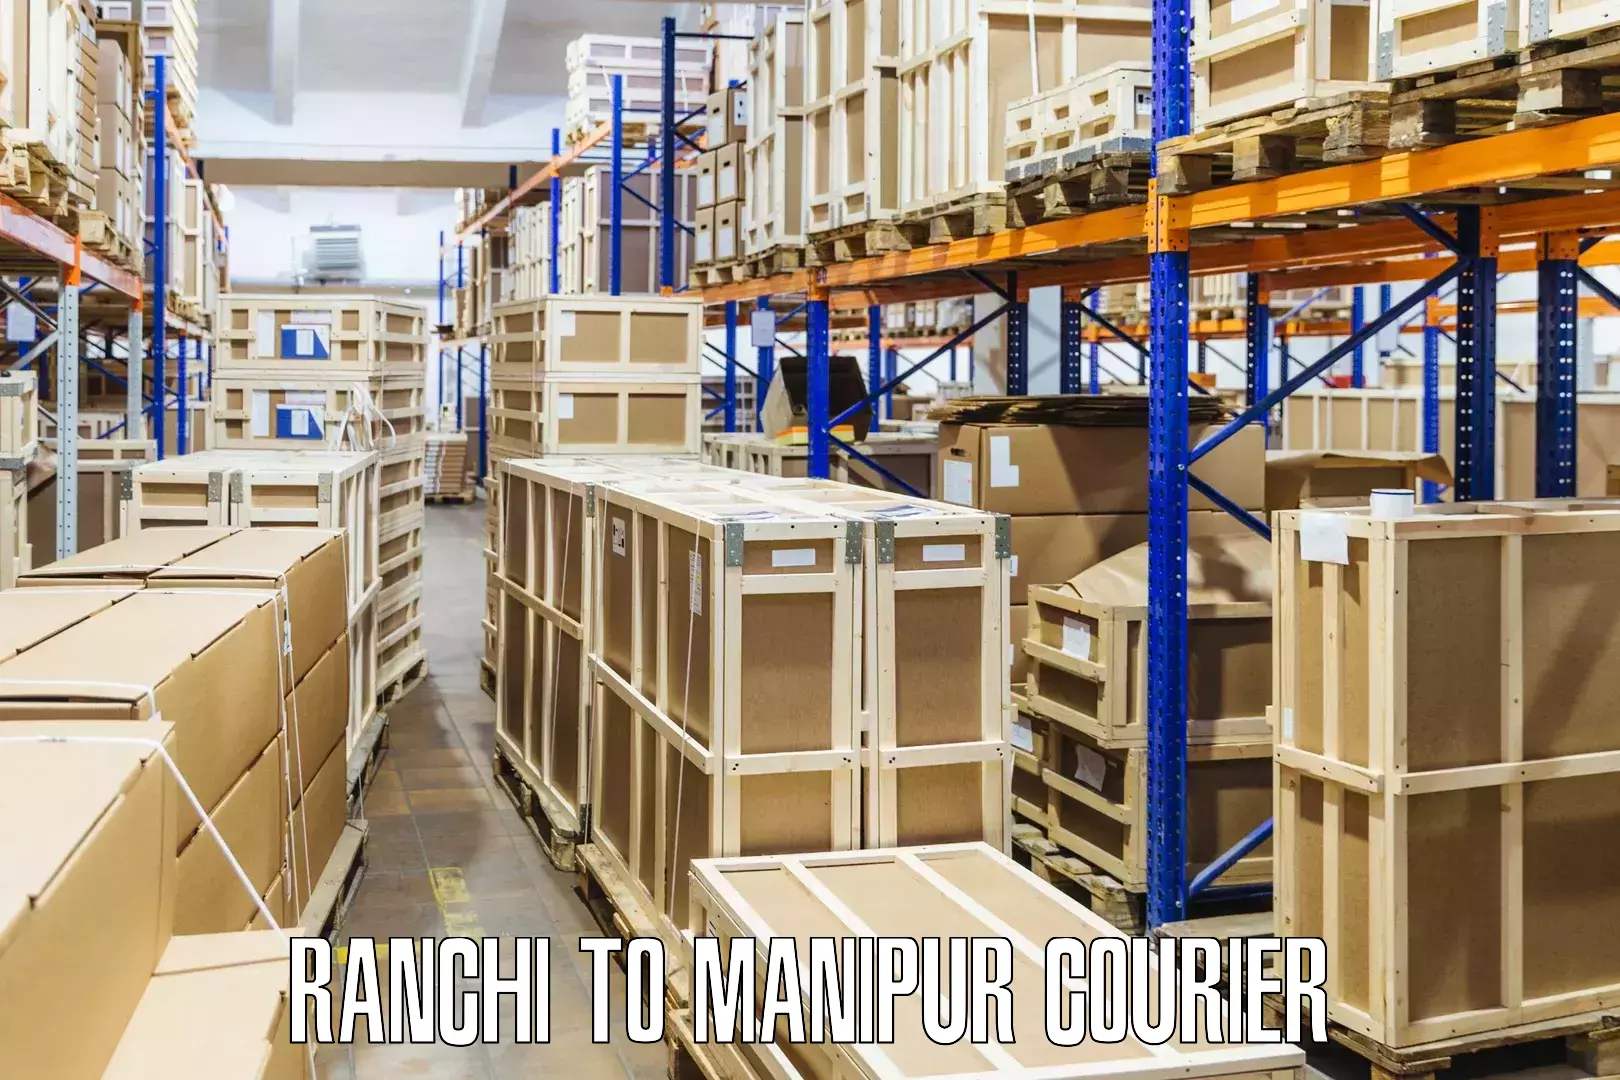 Express mail service Ranchi to Manipur